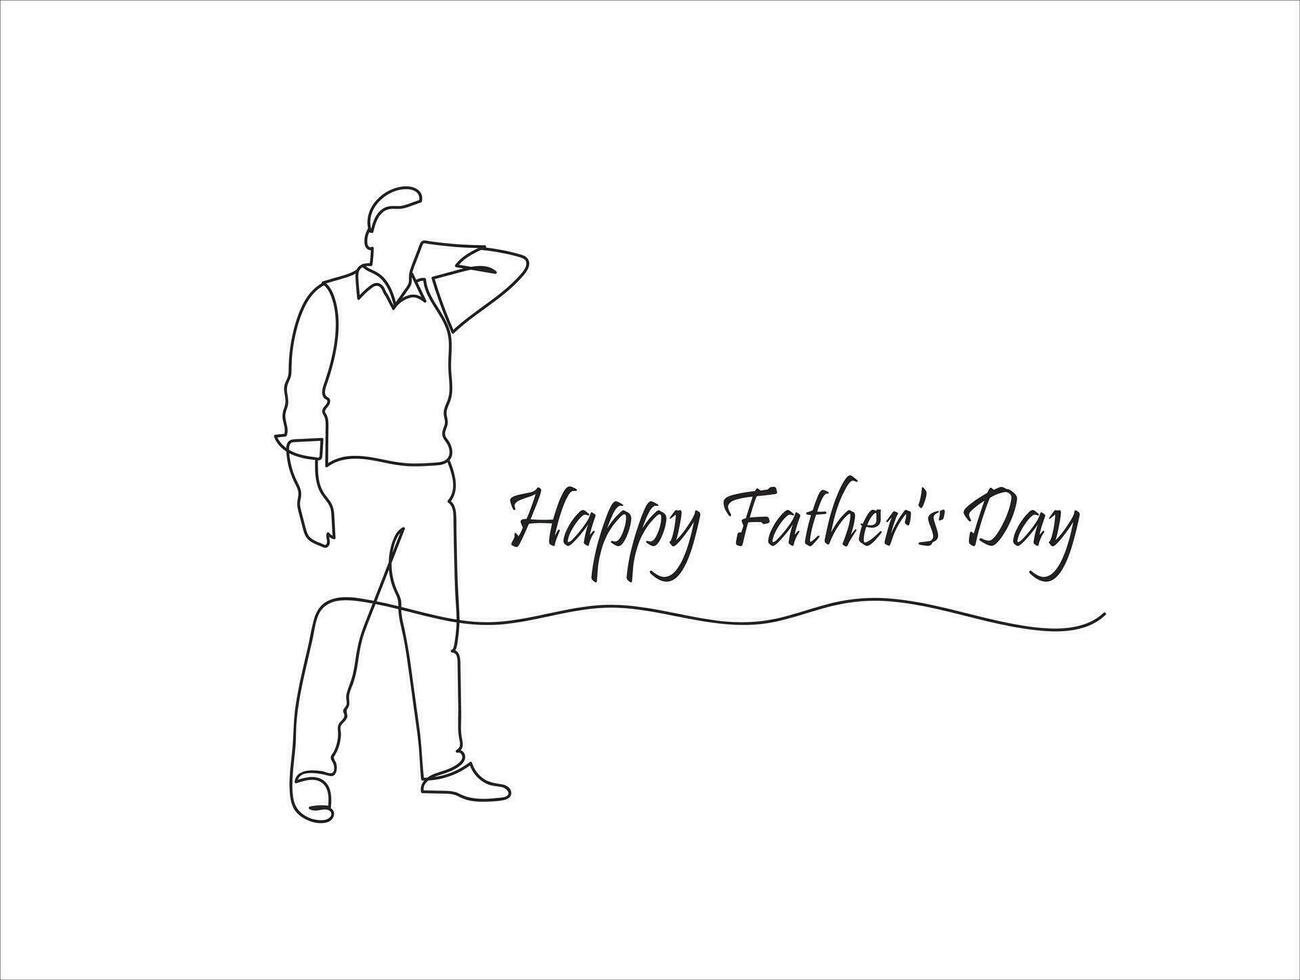 Happy Fathers day line drawing poster vector